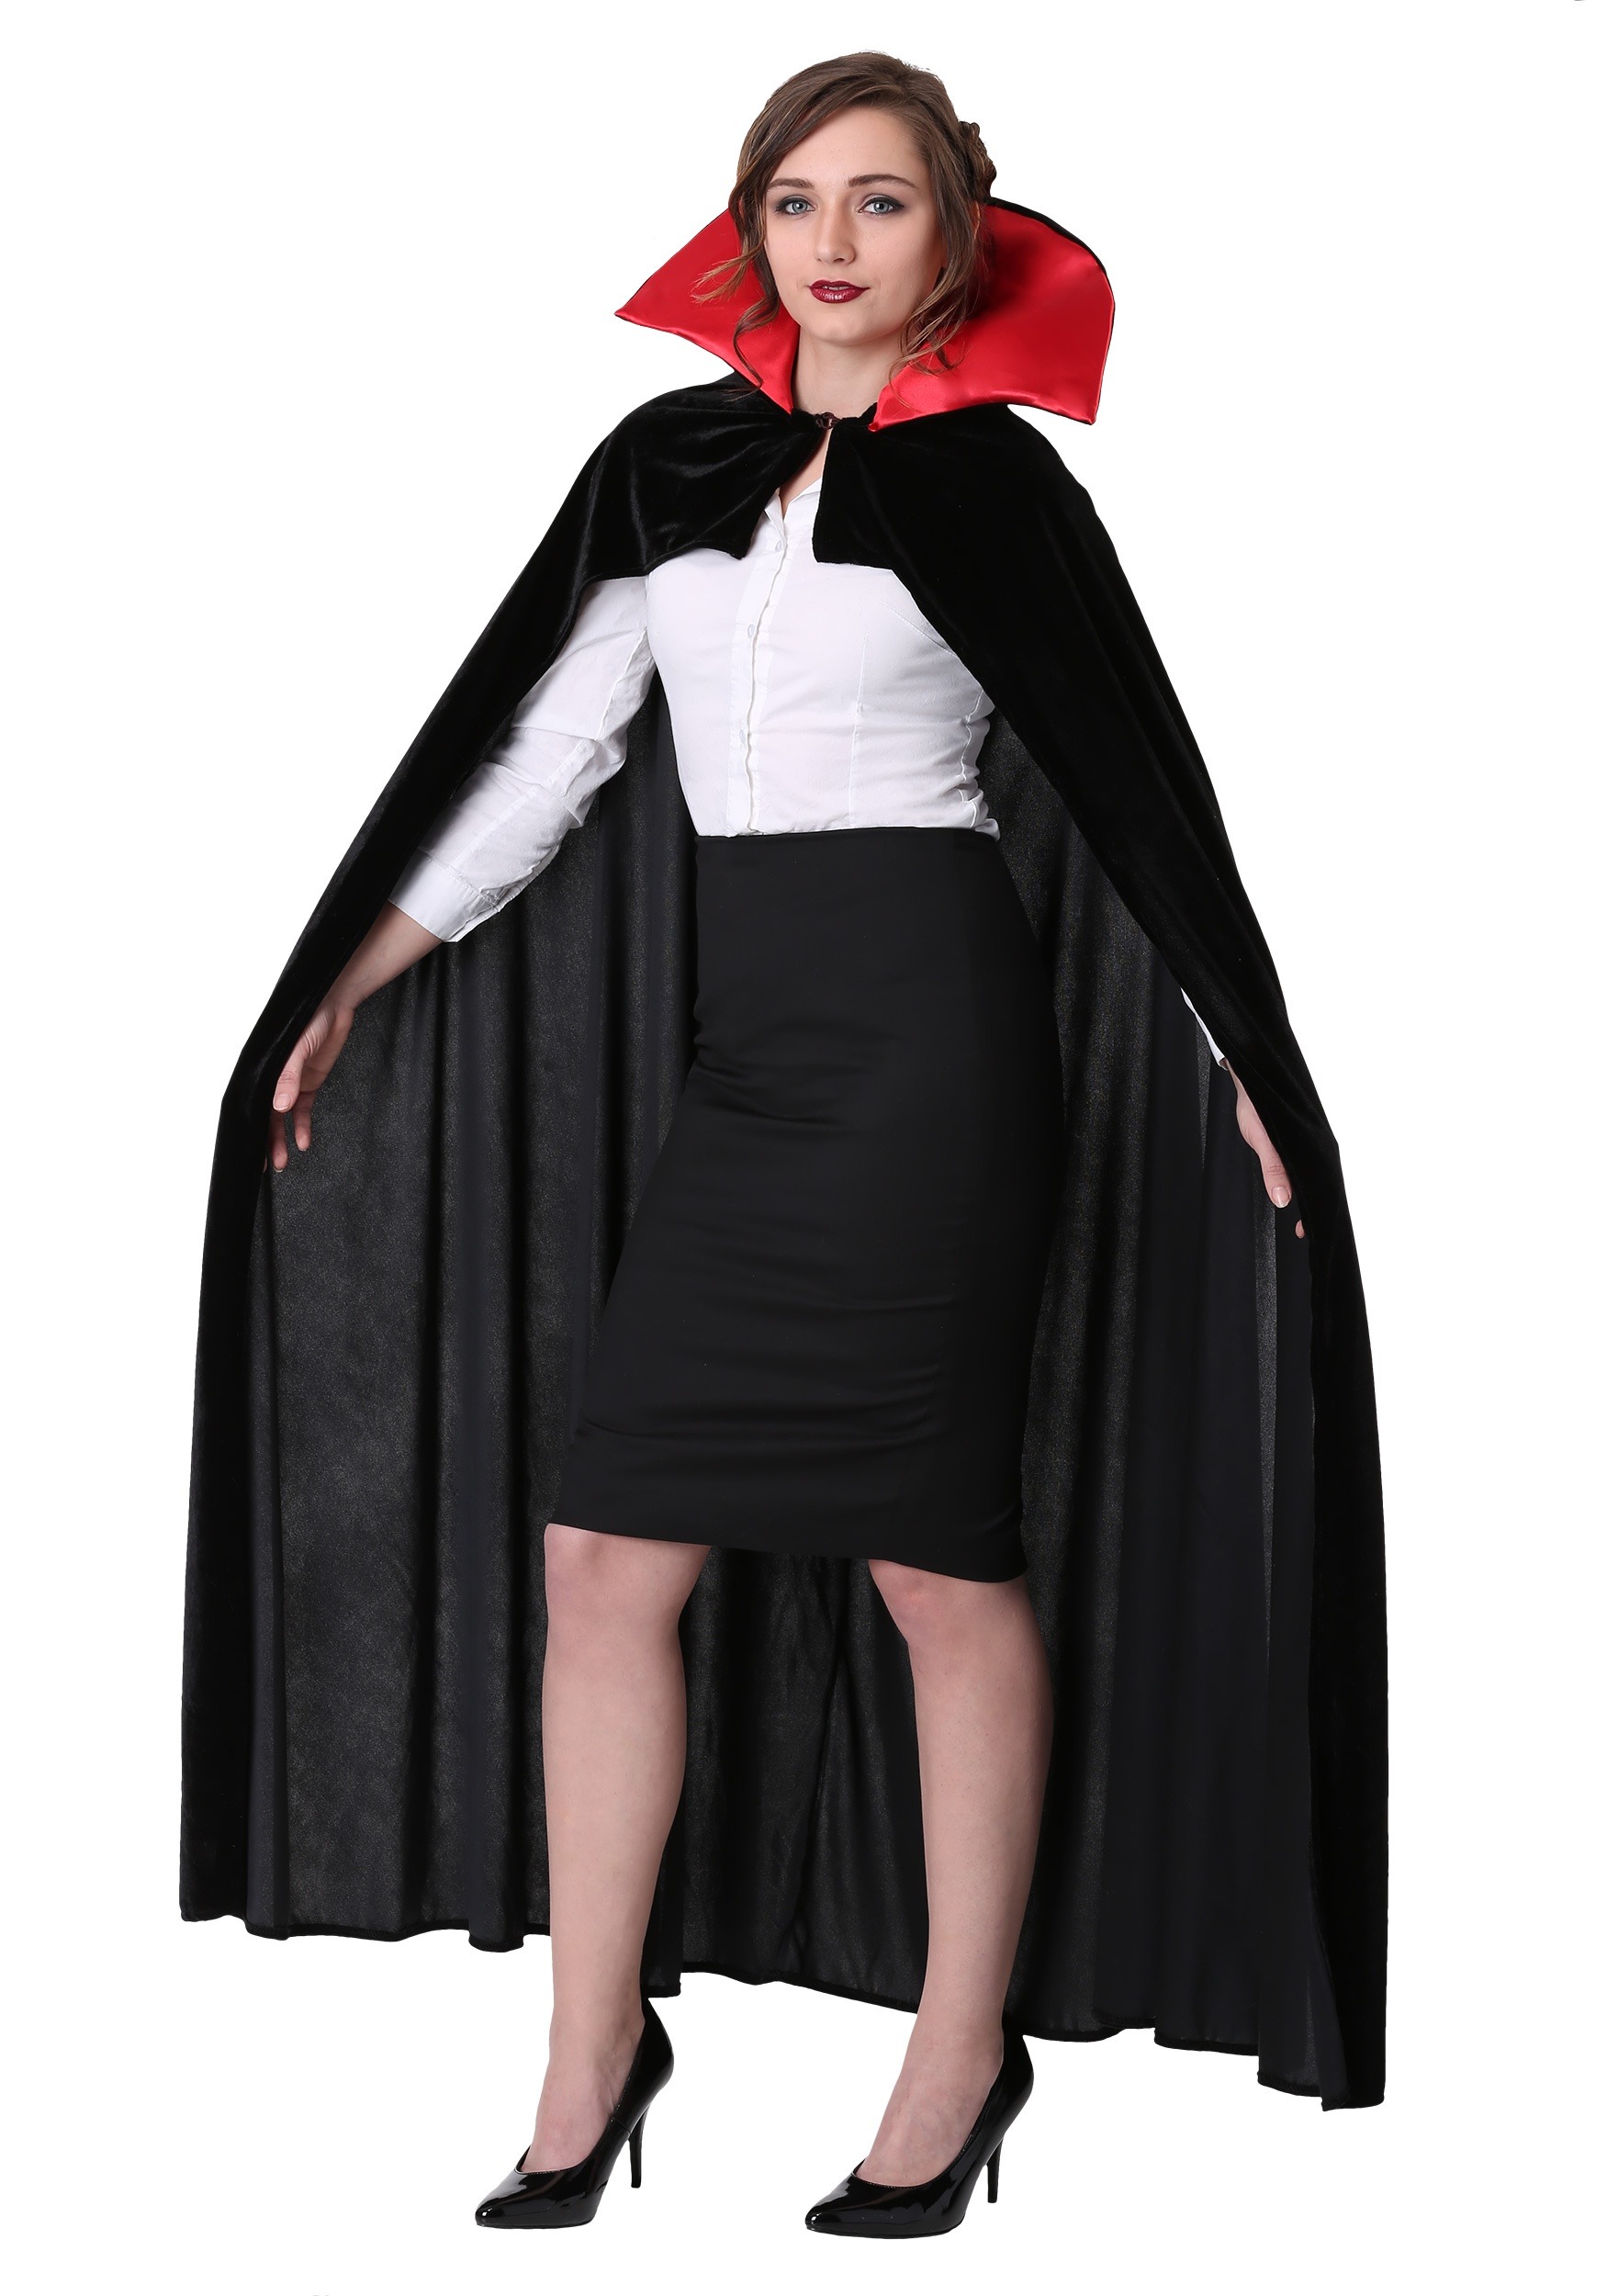 Vampire Costumes With Cape For Women